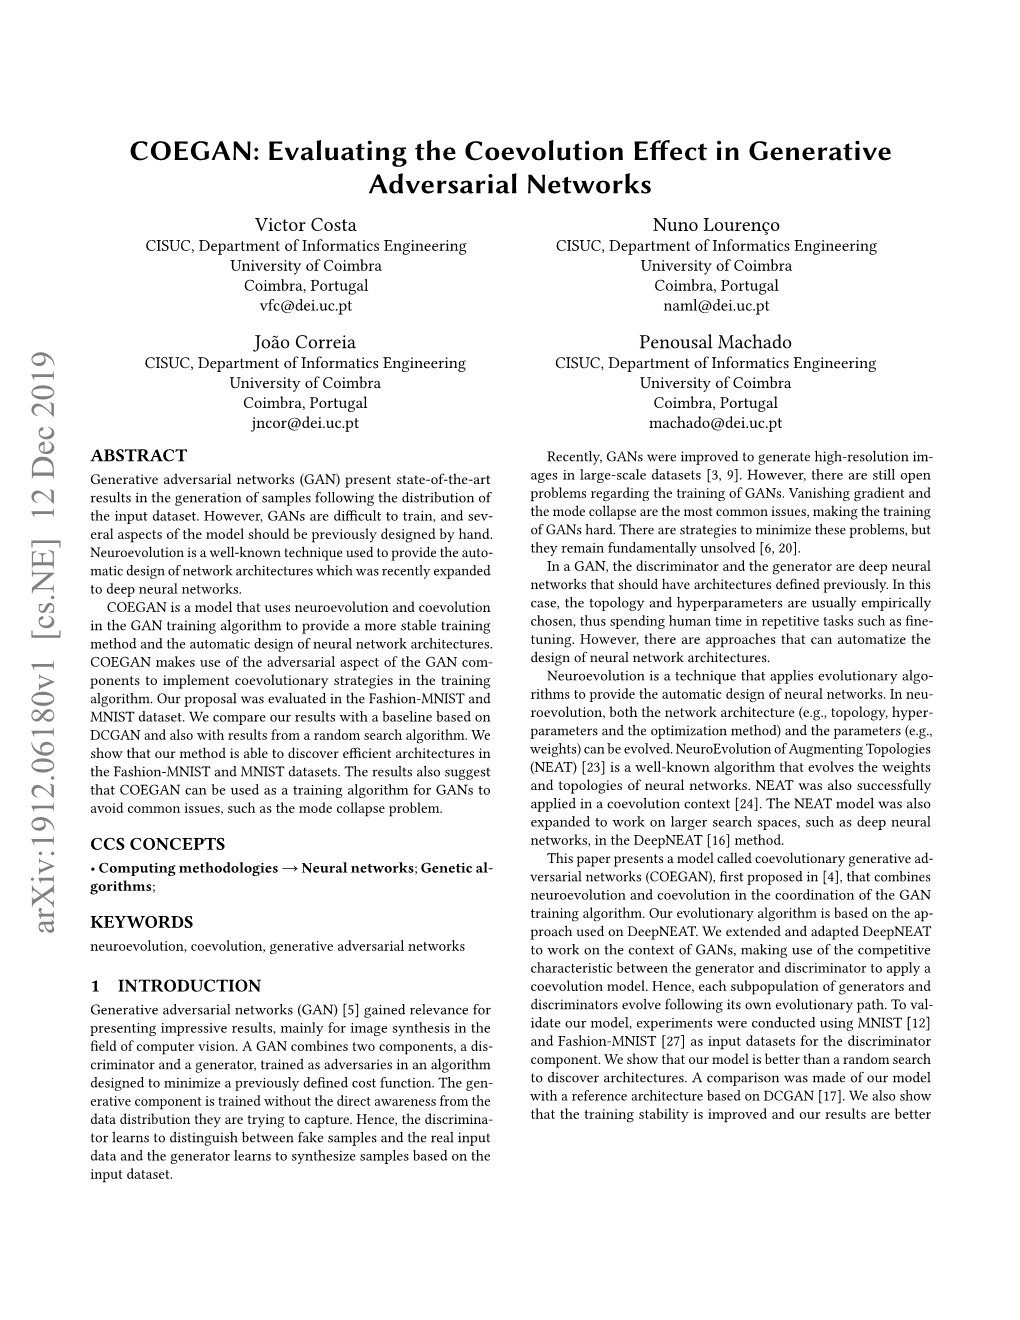 Evaluating the Coevolution Effect in Generative Adversarial Networks